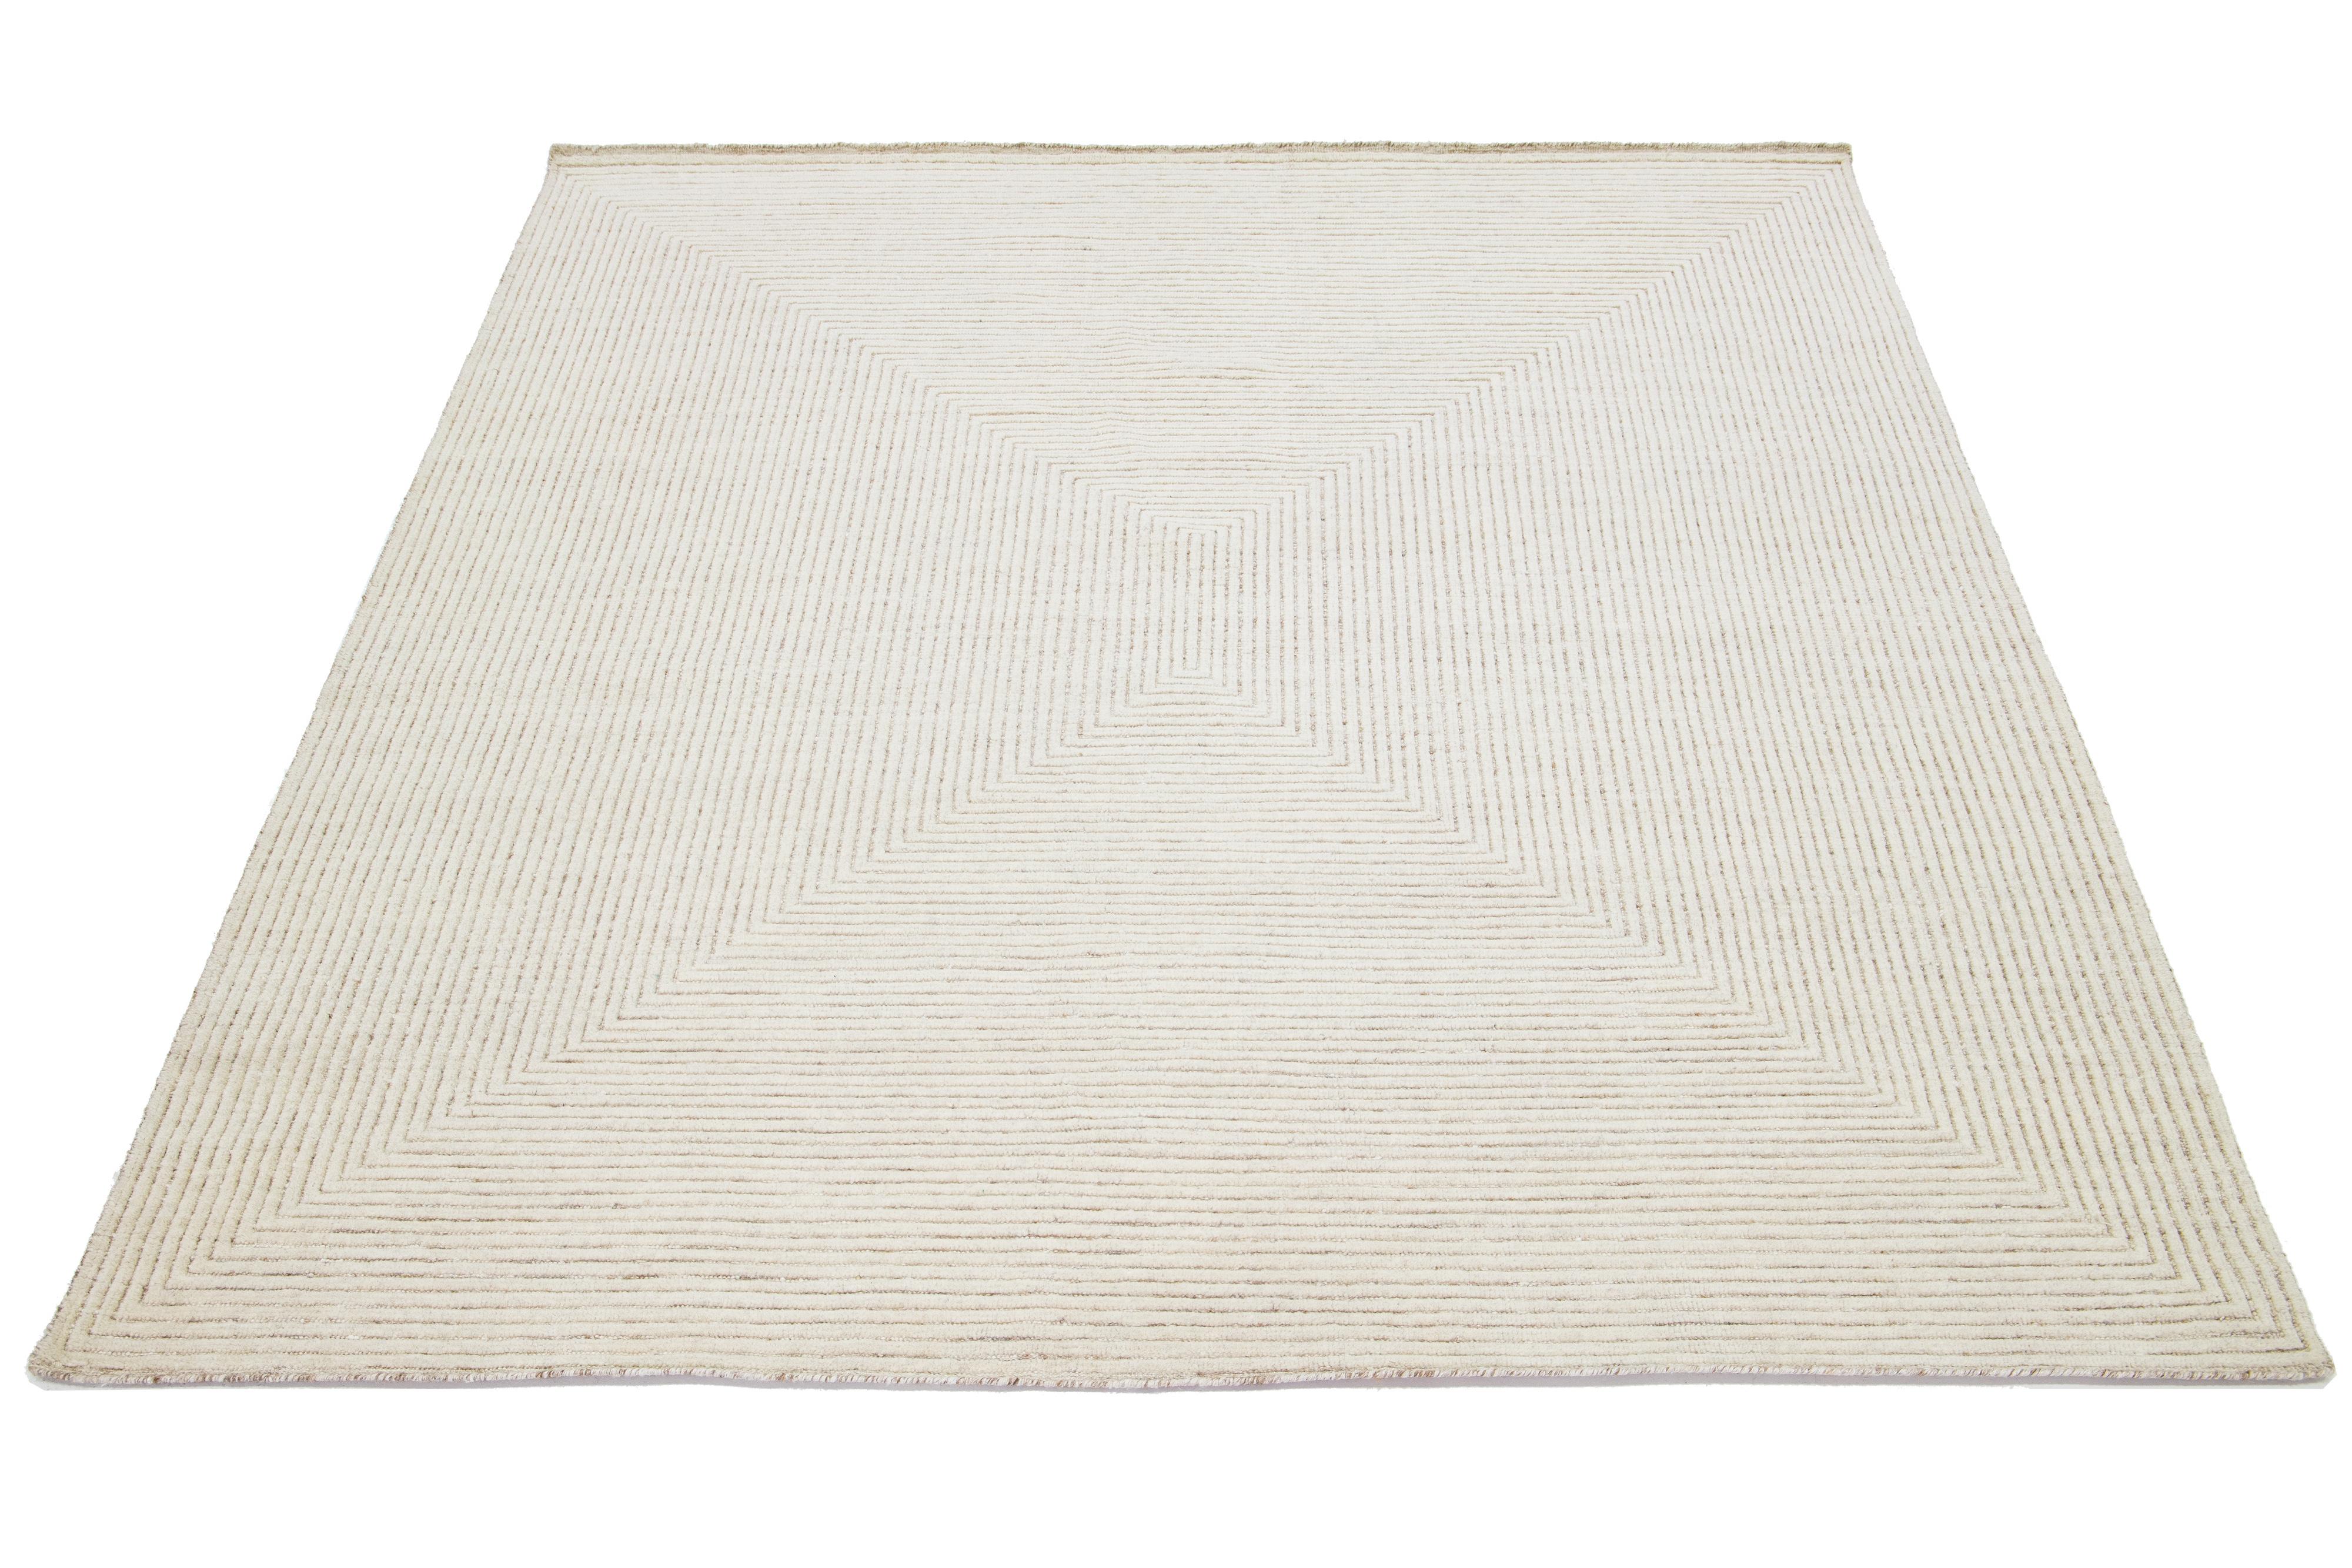 This modern Moroccan rug is hand-knotted from wool and showcases an elegant geometric design in exquisite shades of beige.

This rug measures 7'11